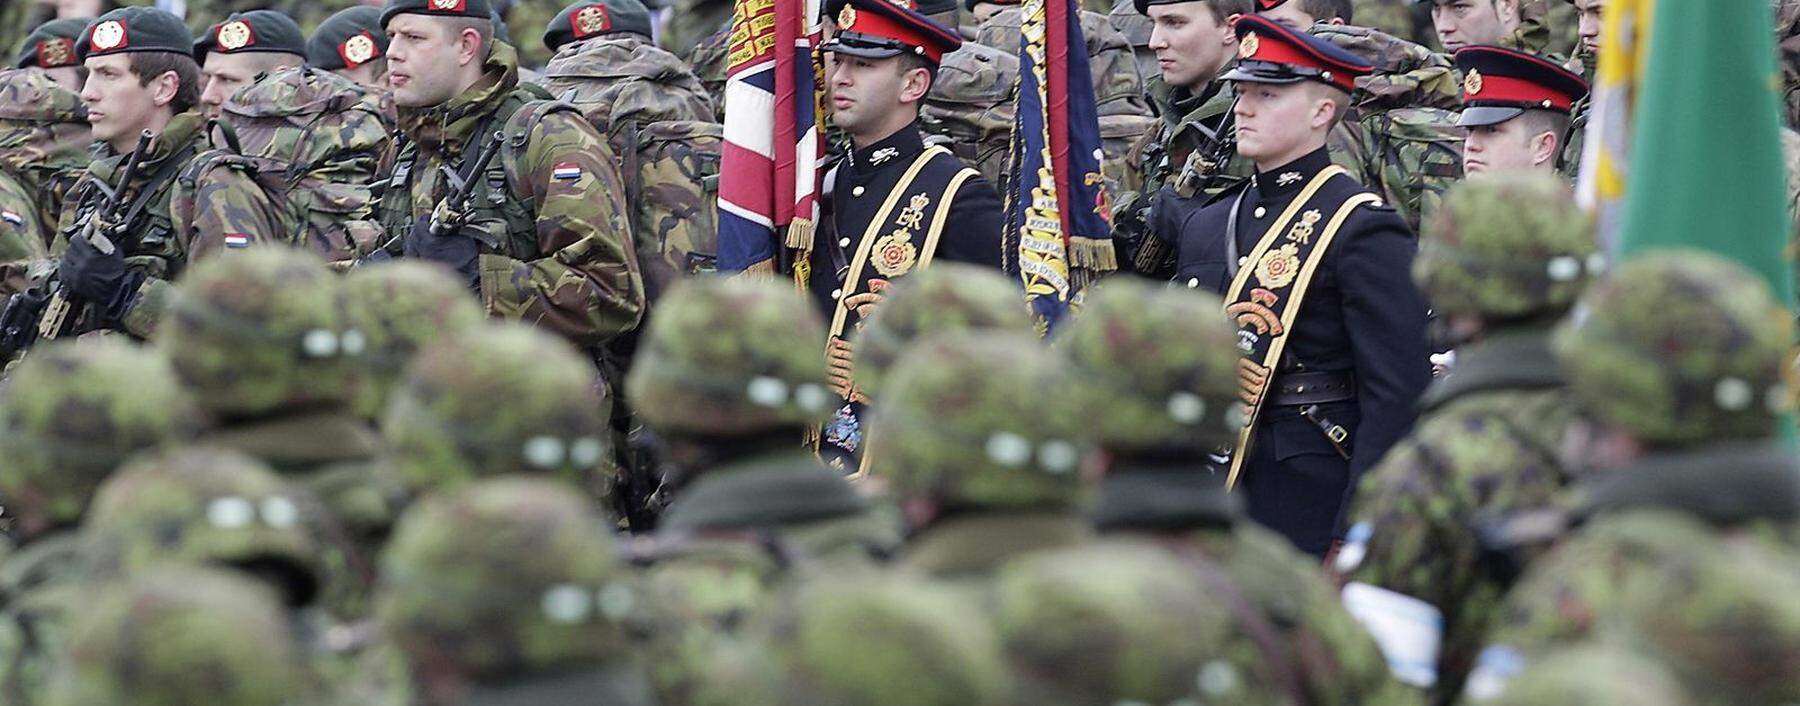 Netherland's and British soldiers attend military parade celebrating Estonia's Independence Day near border crossing with Russia in Narva